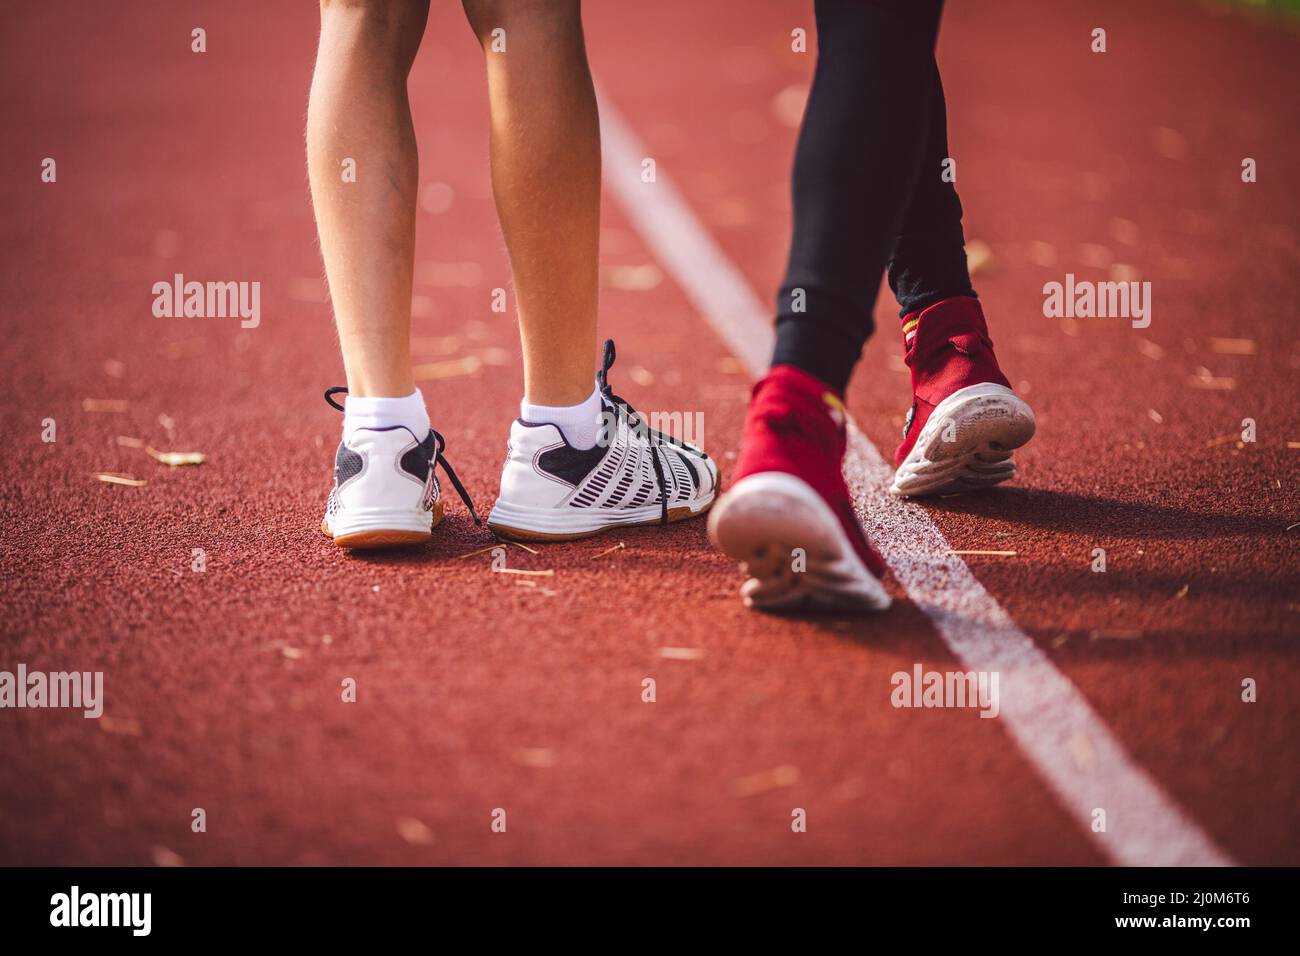 Four legs close-up brother and sister in sneakers run on red treadmill at running stadium back view. Two runners kids side by si Stock Photo